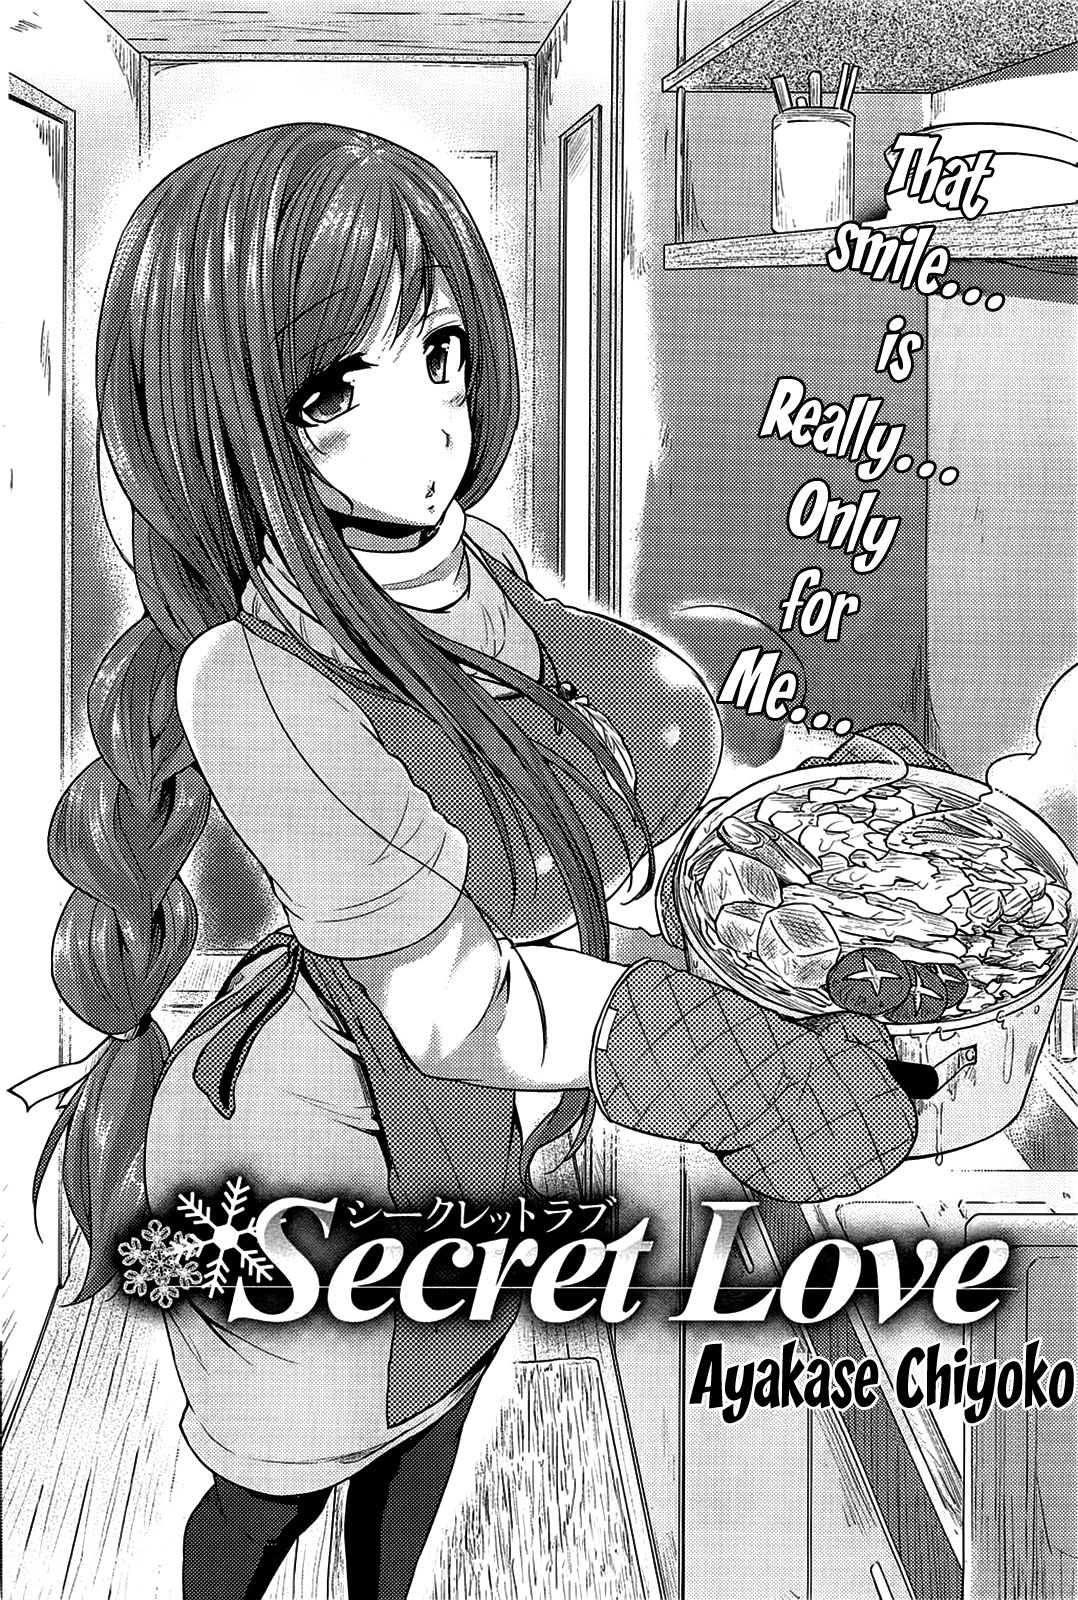 [Ayakase Chiyoko] Secret Love Ch.1 + Extra Ch.2+ 3 (Comic Hot Milk)[ENG][The Lusty Lady Project] 1